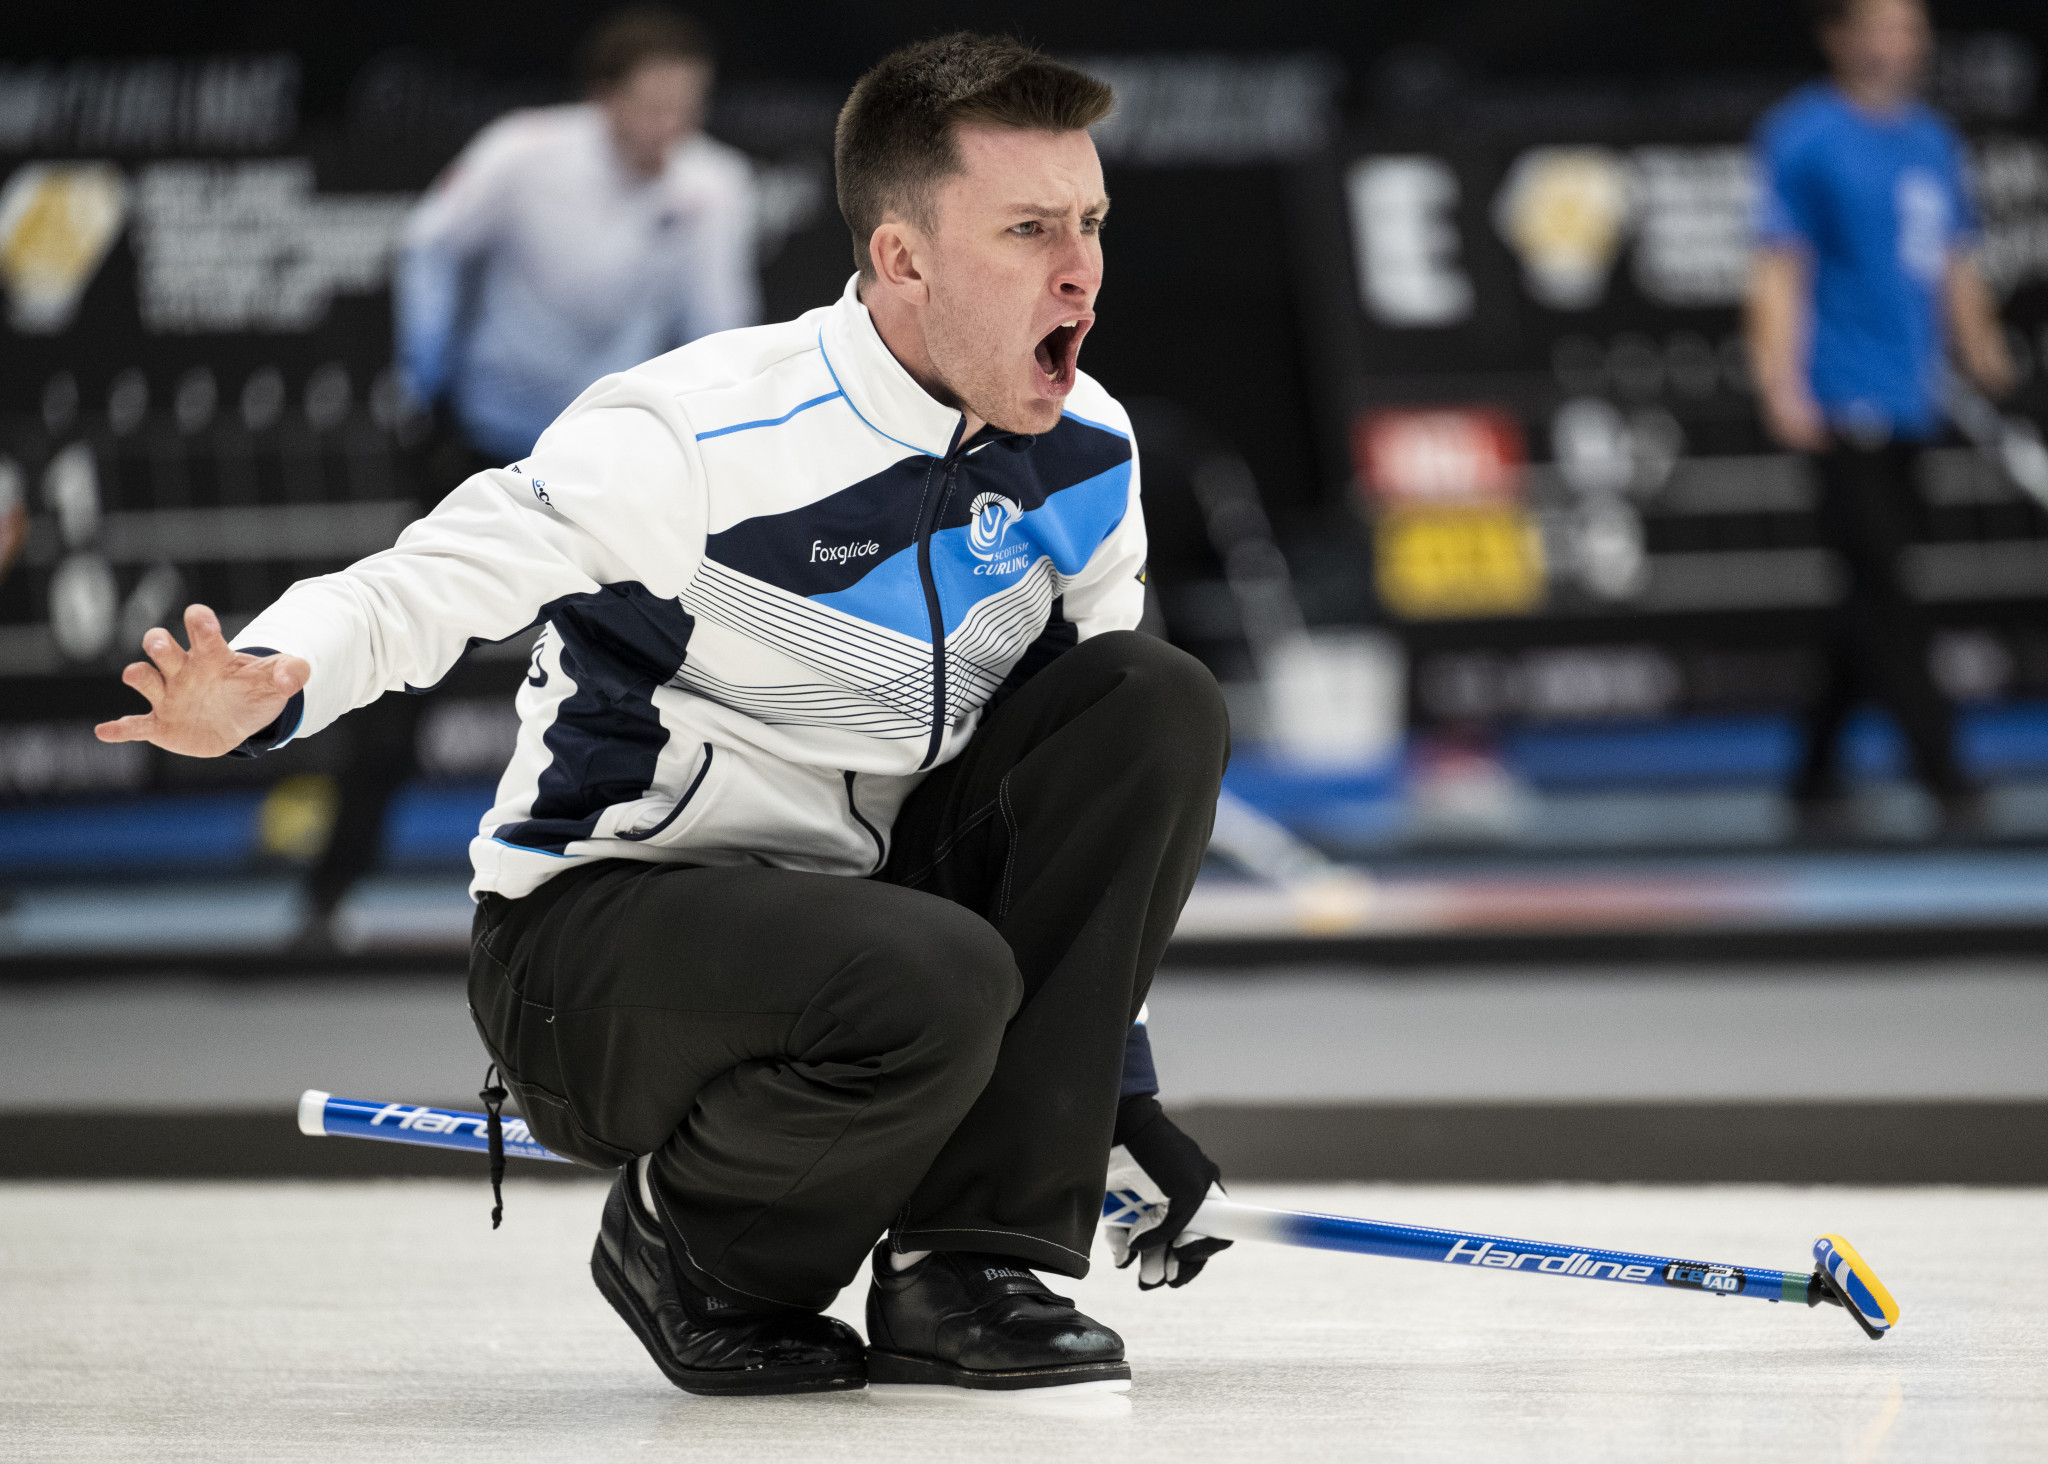 James Craik led Scotland to the World Junior Curling Championships title ©WCF/Cheyenne Boone